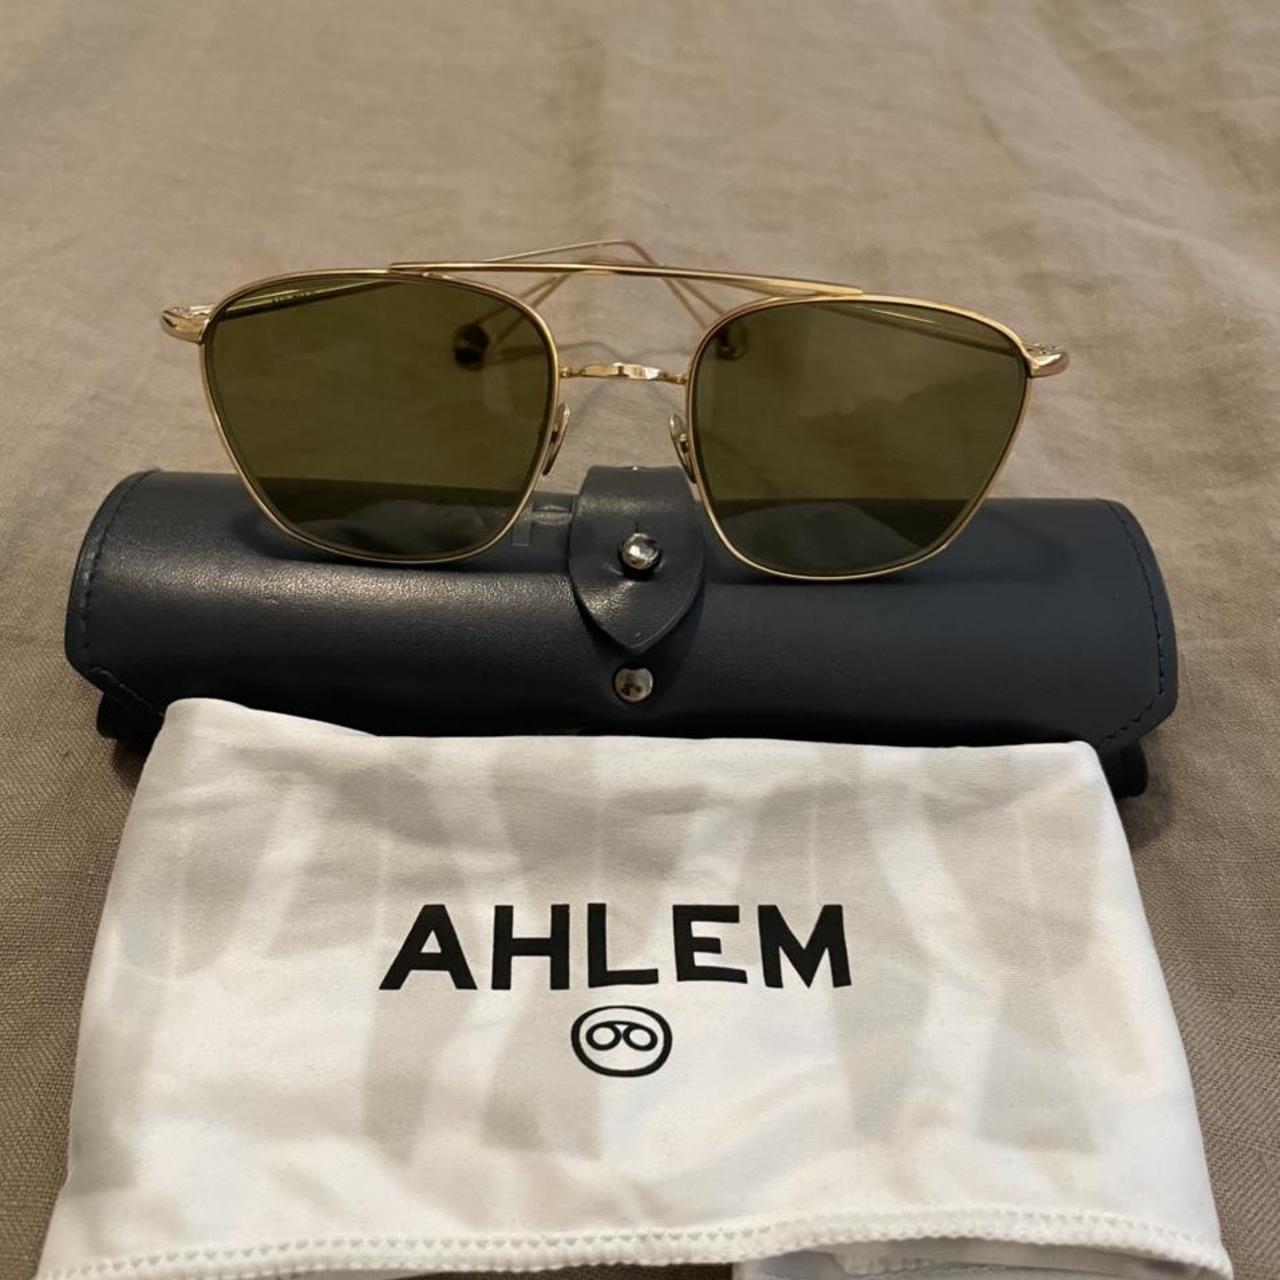 Product Image 2 - Ahlem Sunglasses - as seen